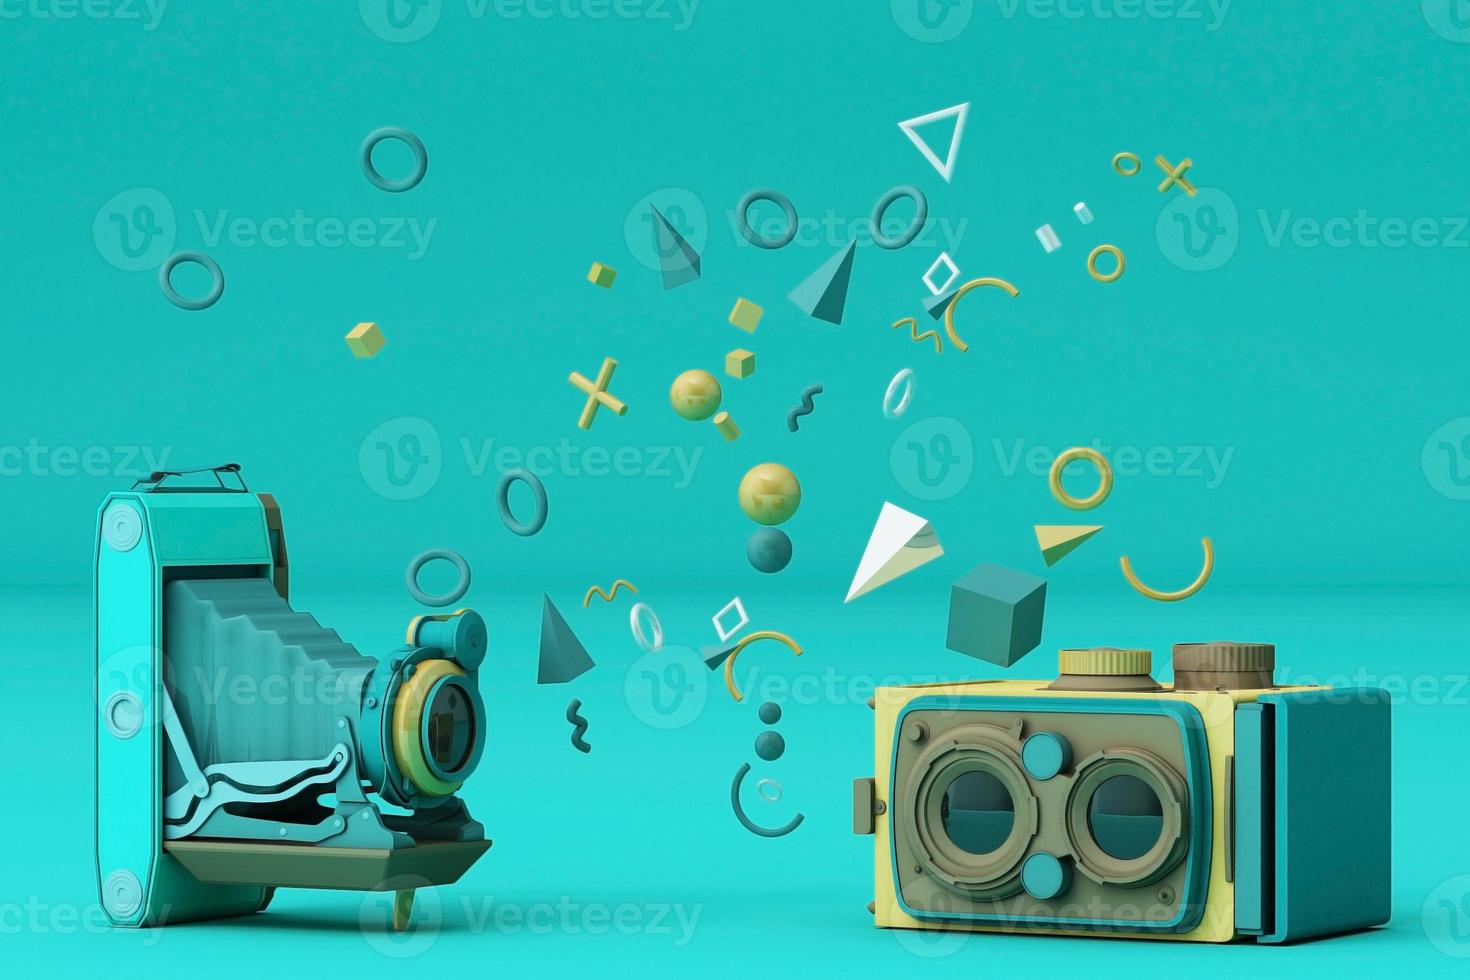 Colorful vintage camera surrounding by memphis pattern on a pastel background. 3d render. photo